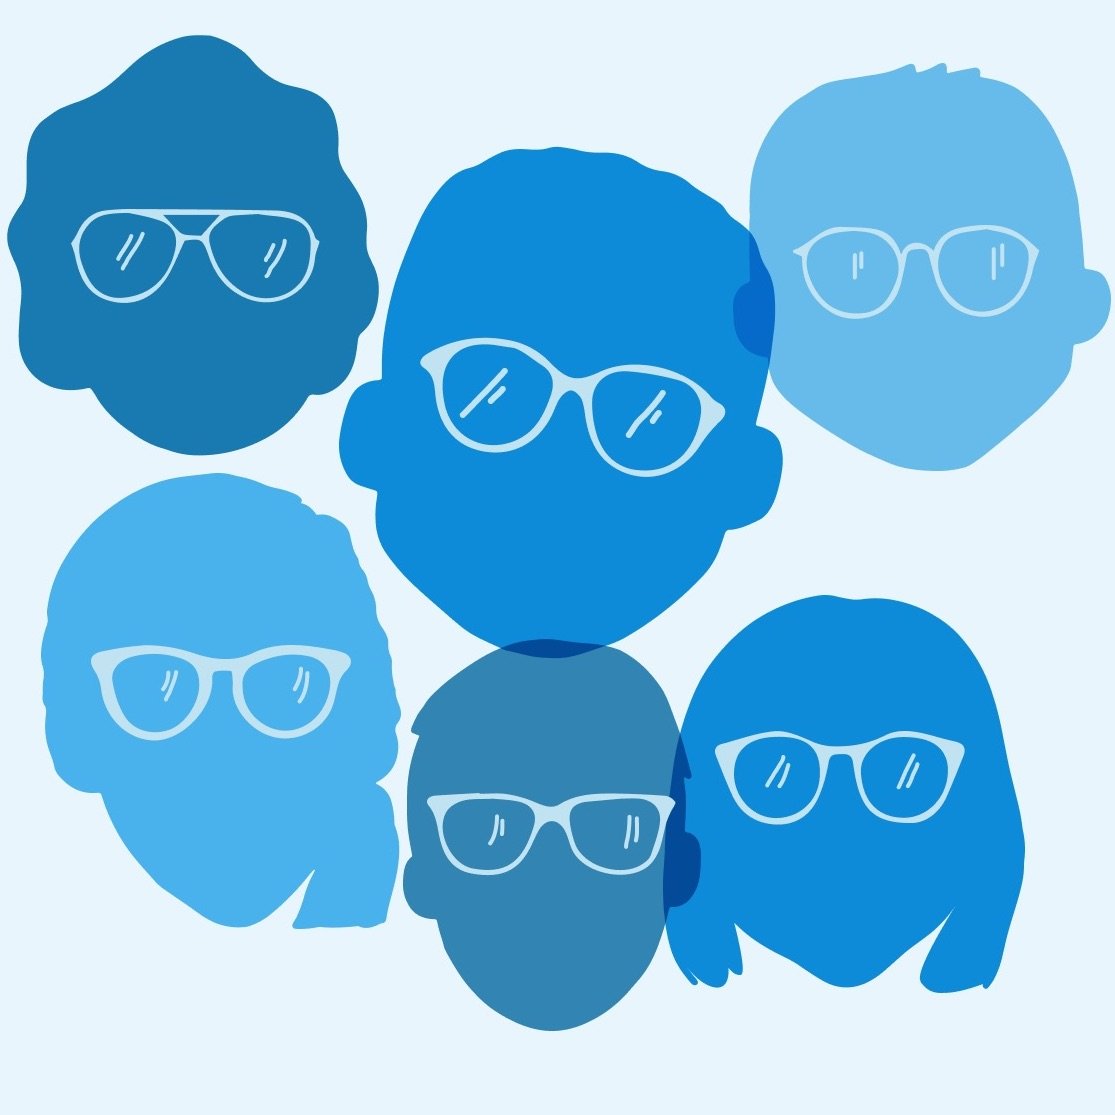 Six silhouettes of different face shapes wearing glasses